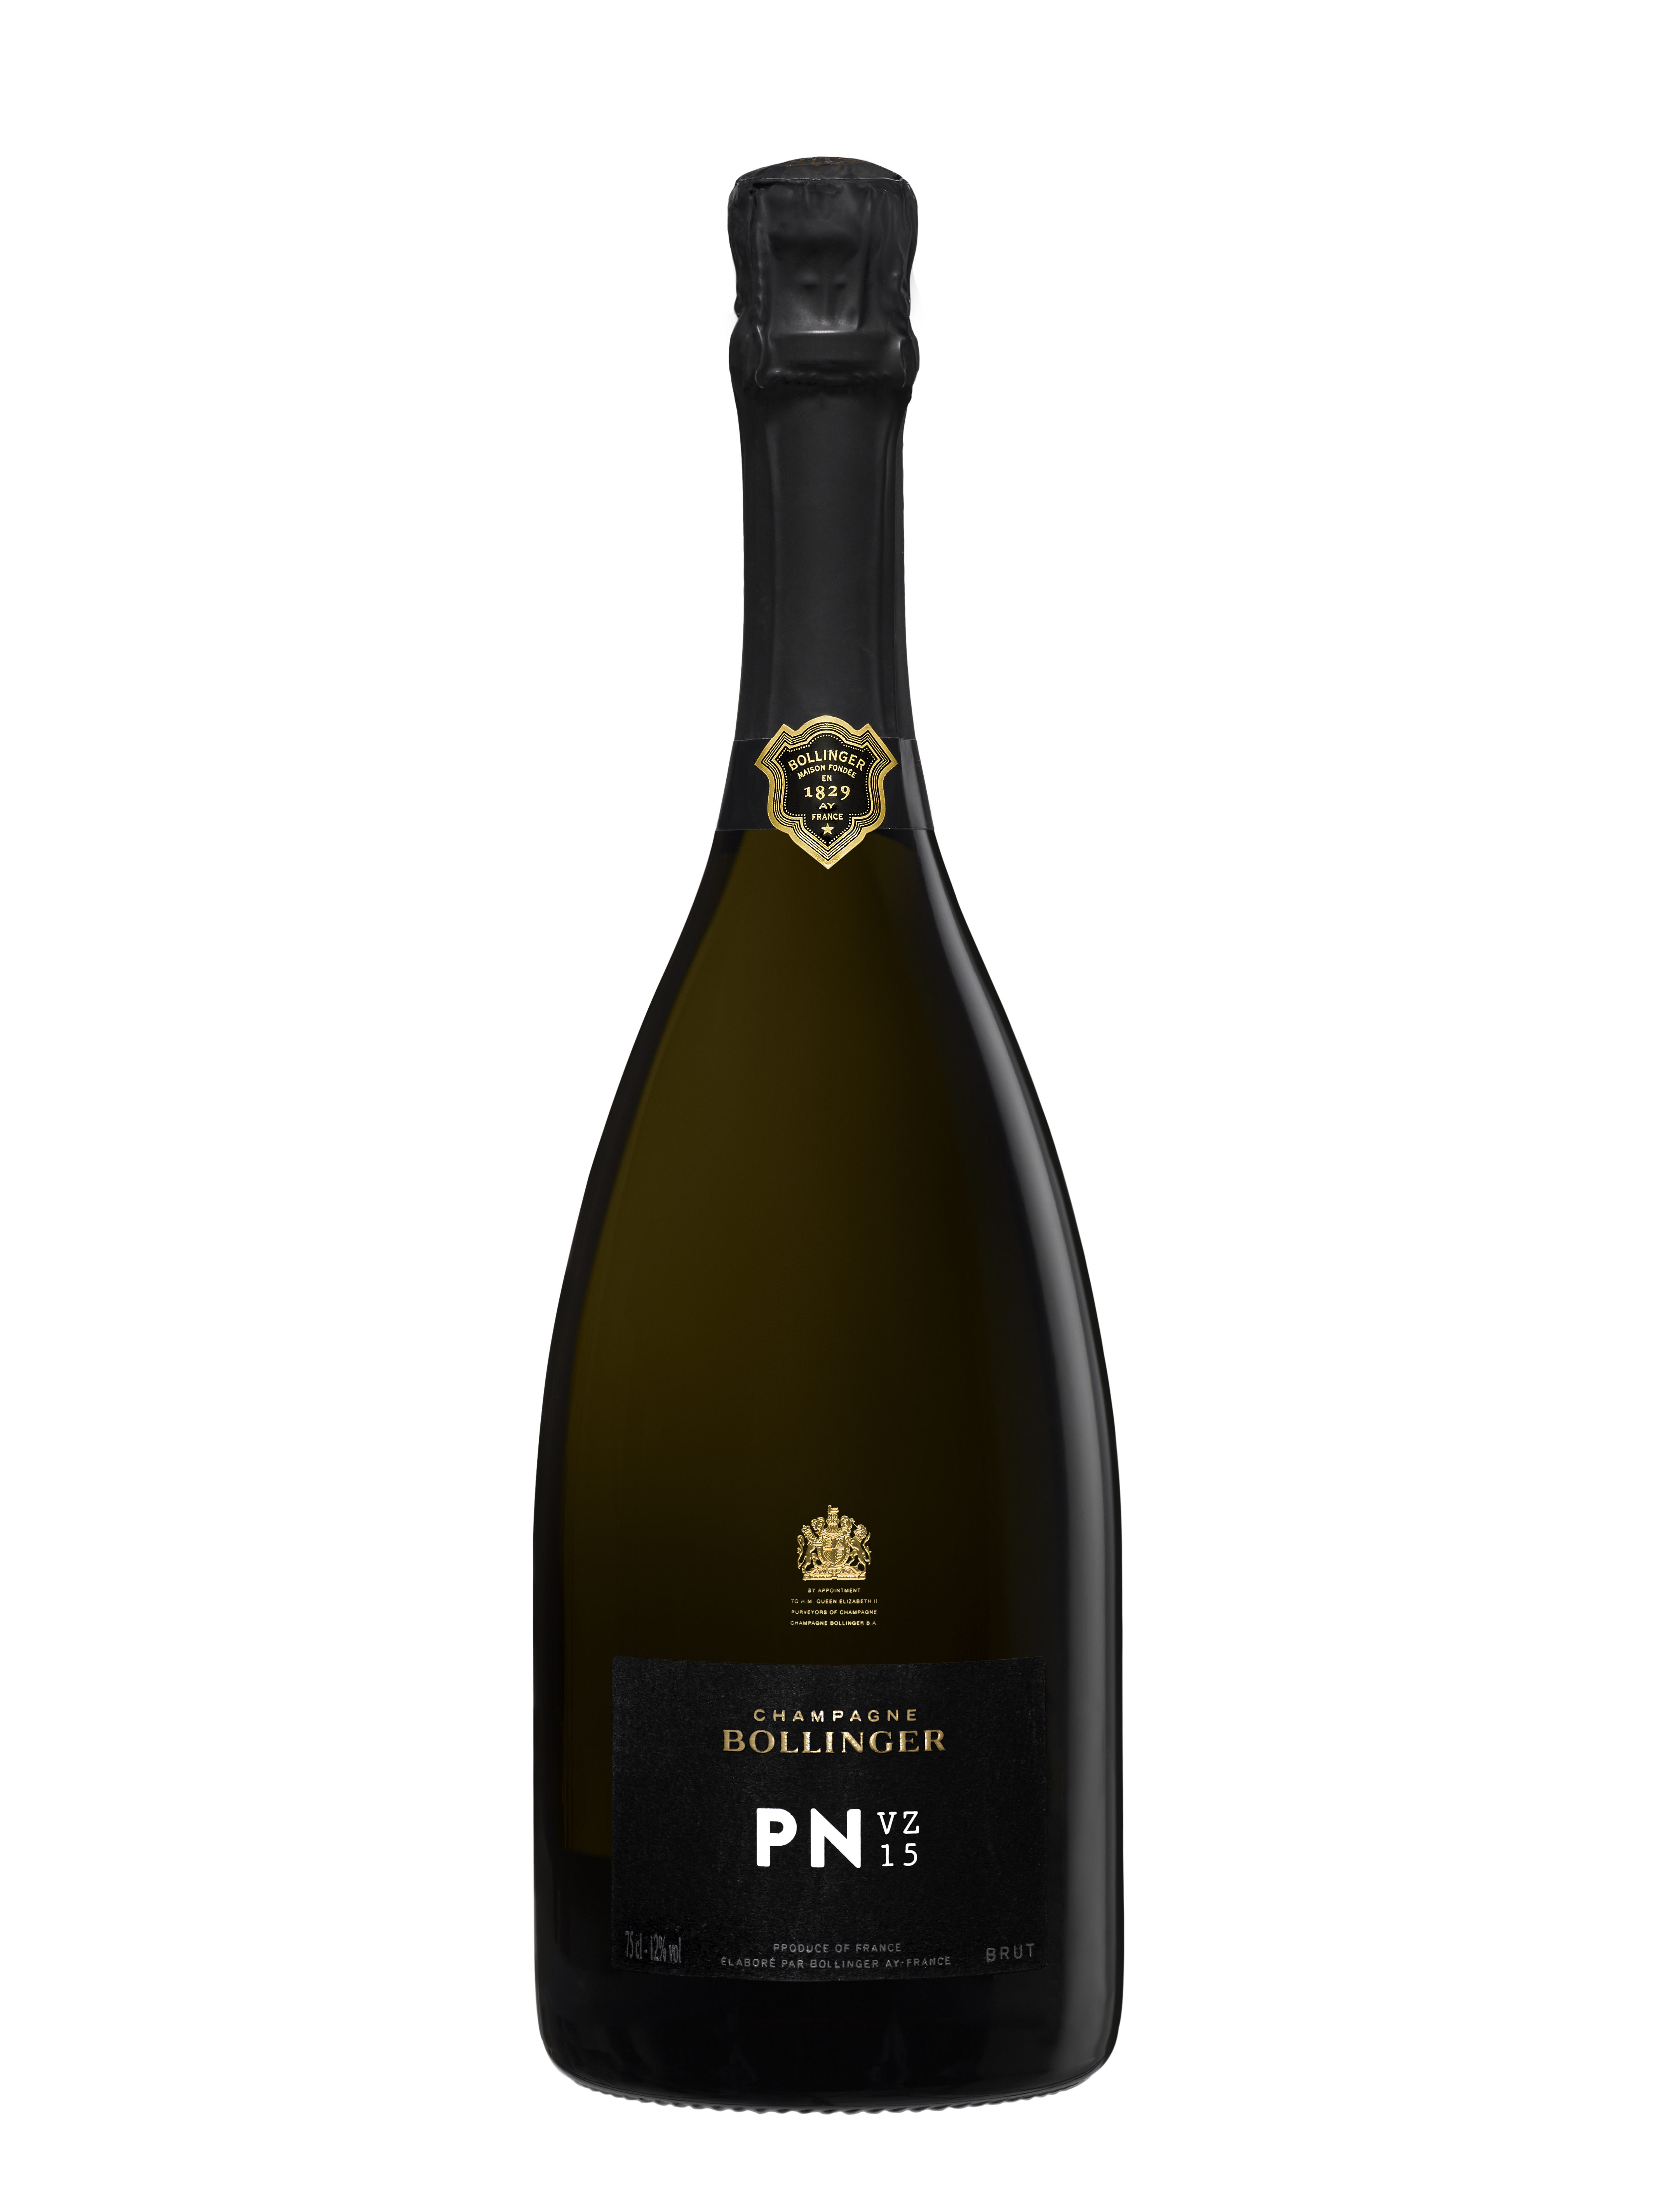 Bollinger debuts new Champagne with the Bollinger PN cuvée